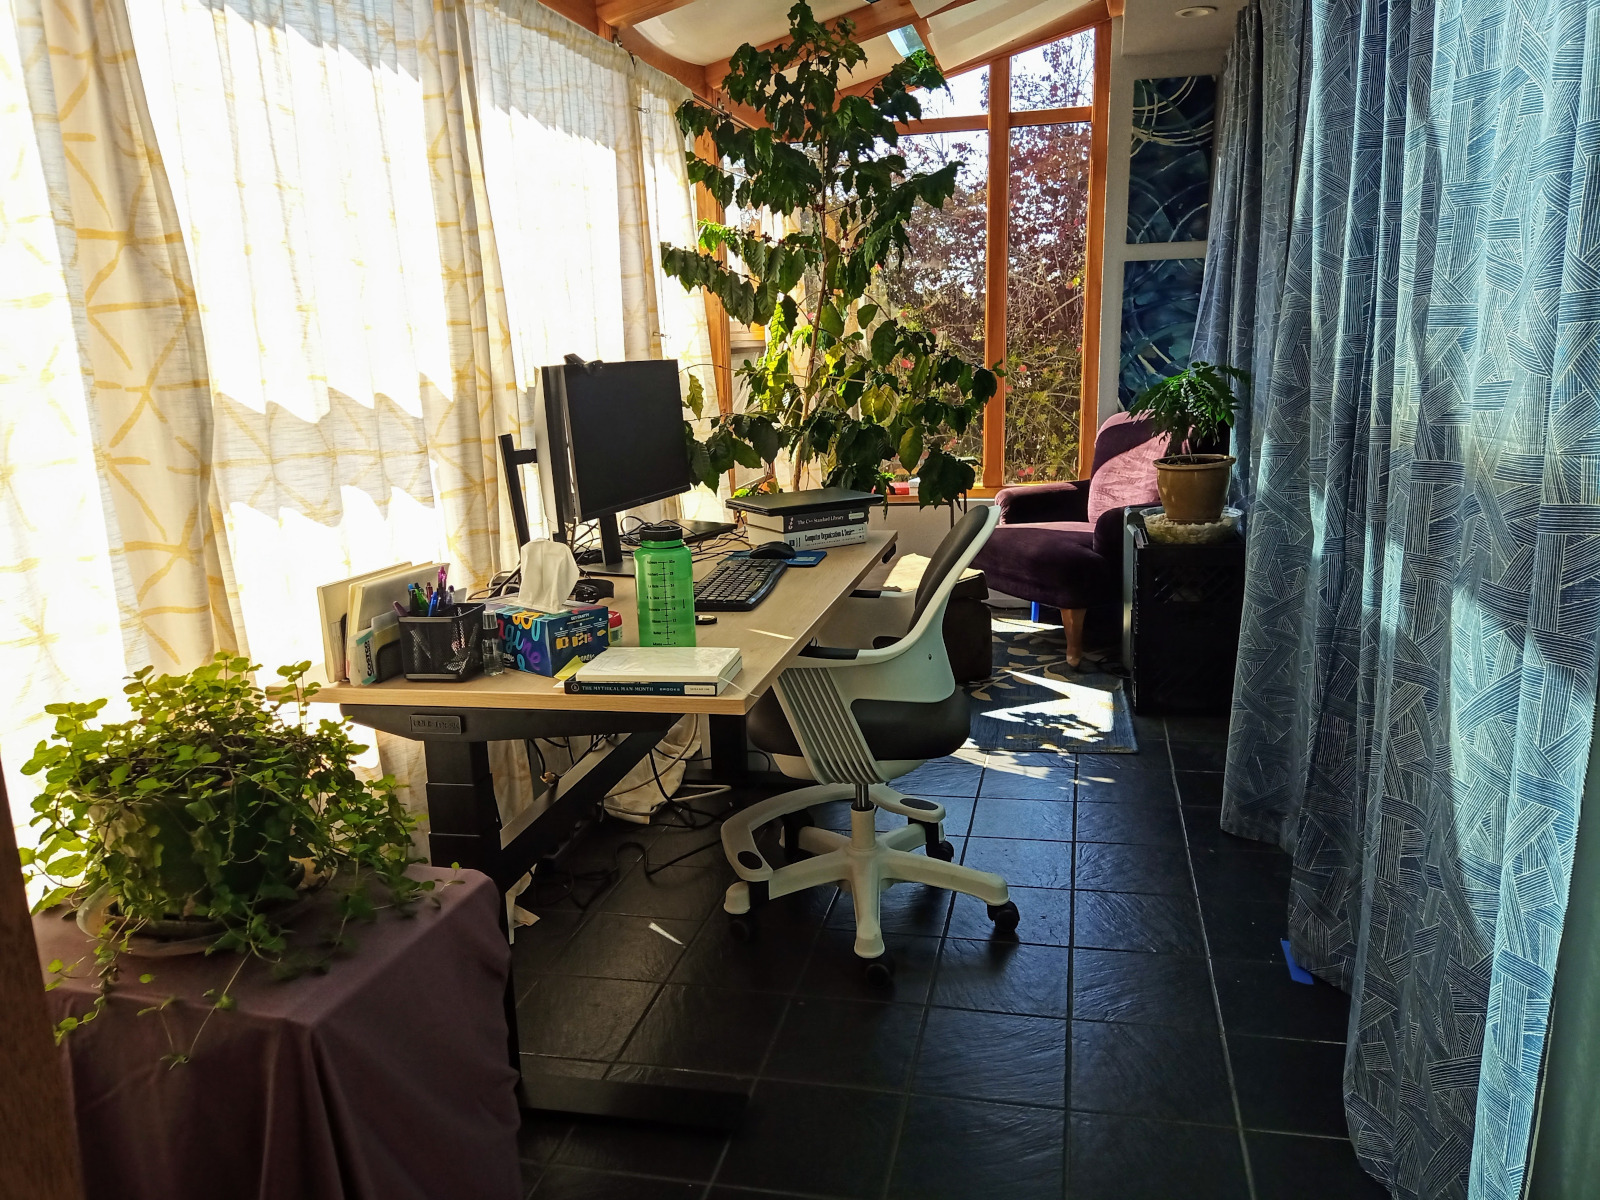 Sunroom office with desk lowered to sitting height. Desk chair is in front of desk.